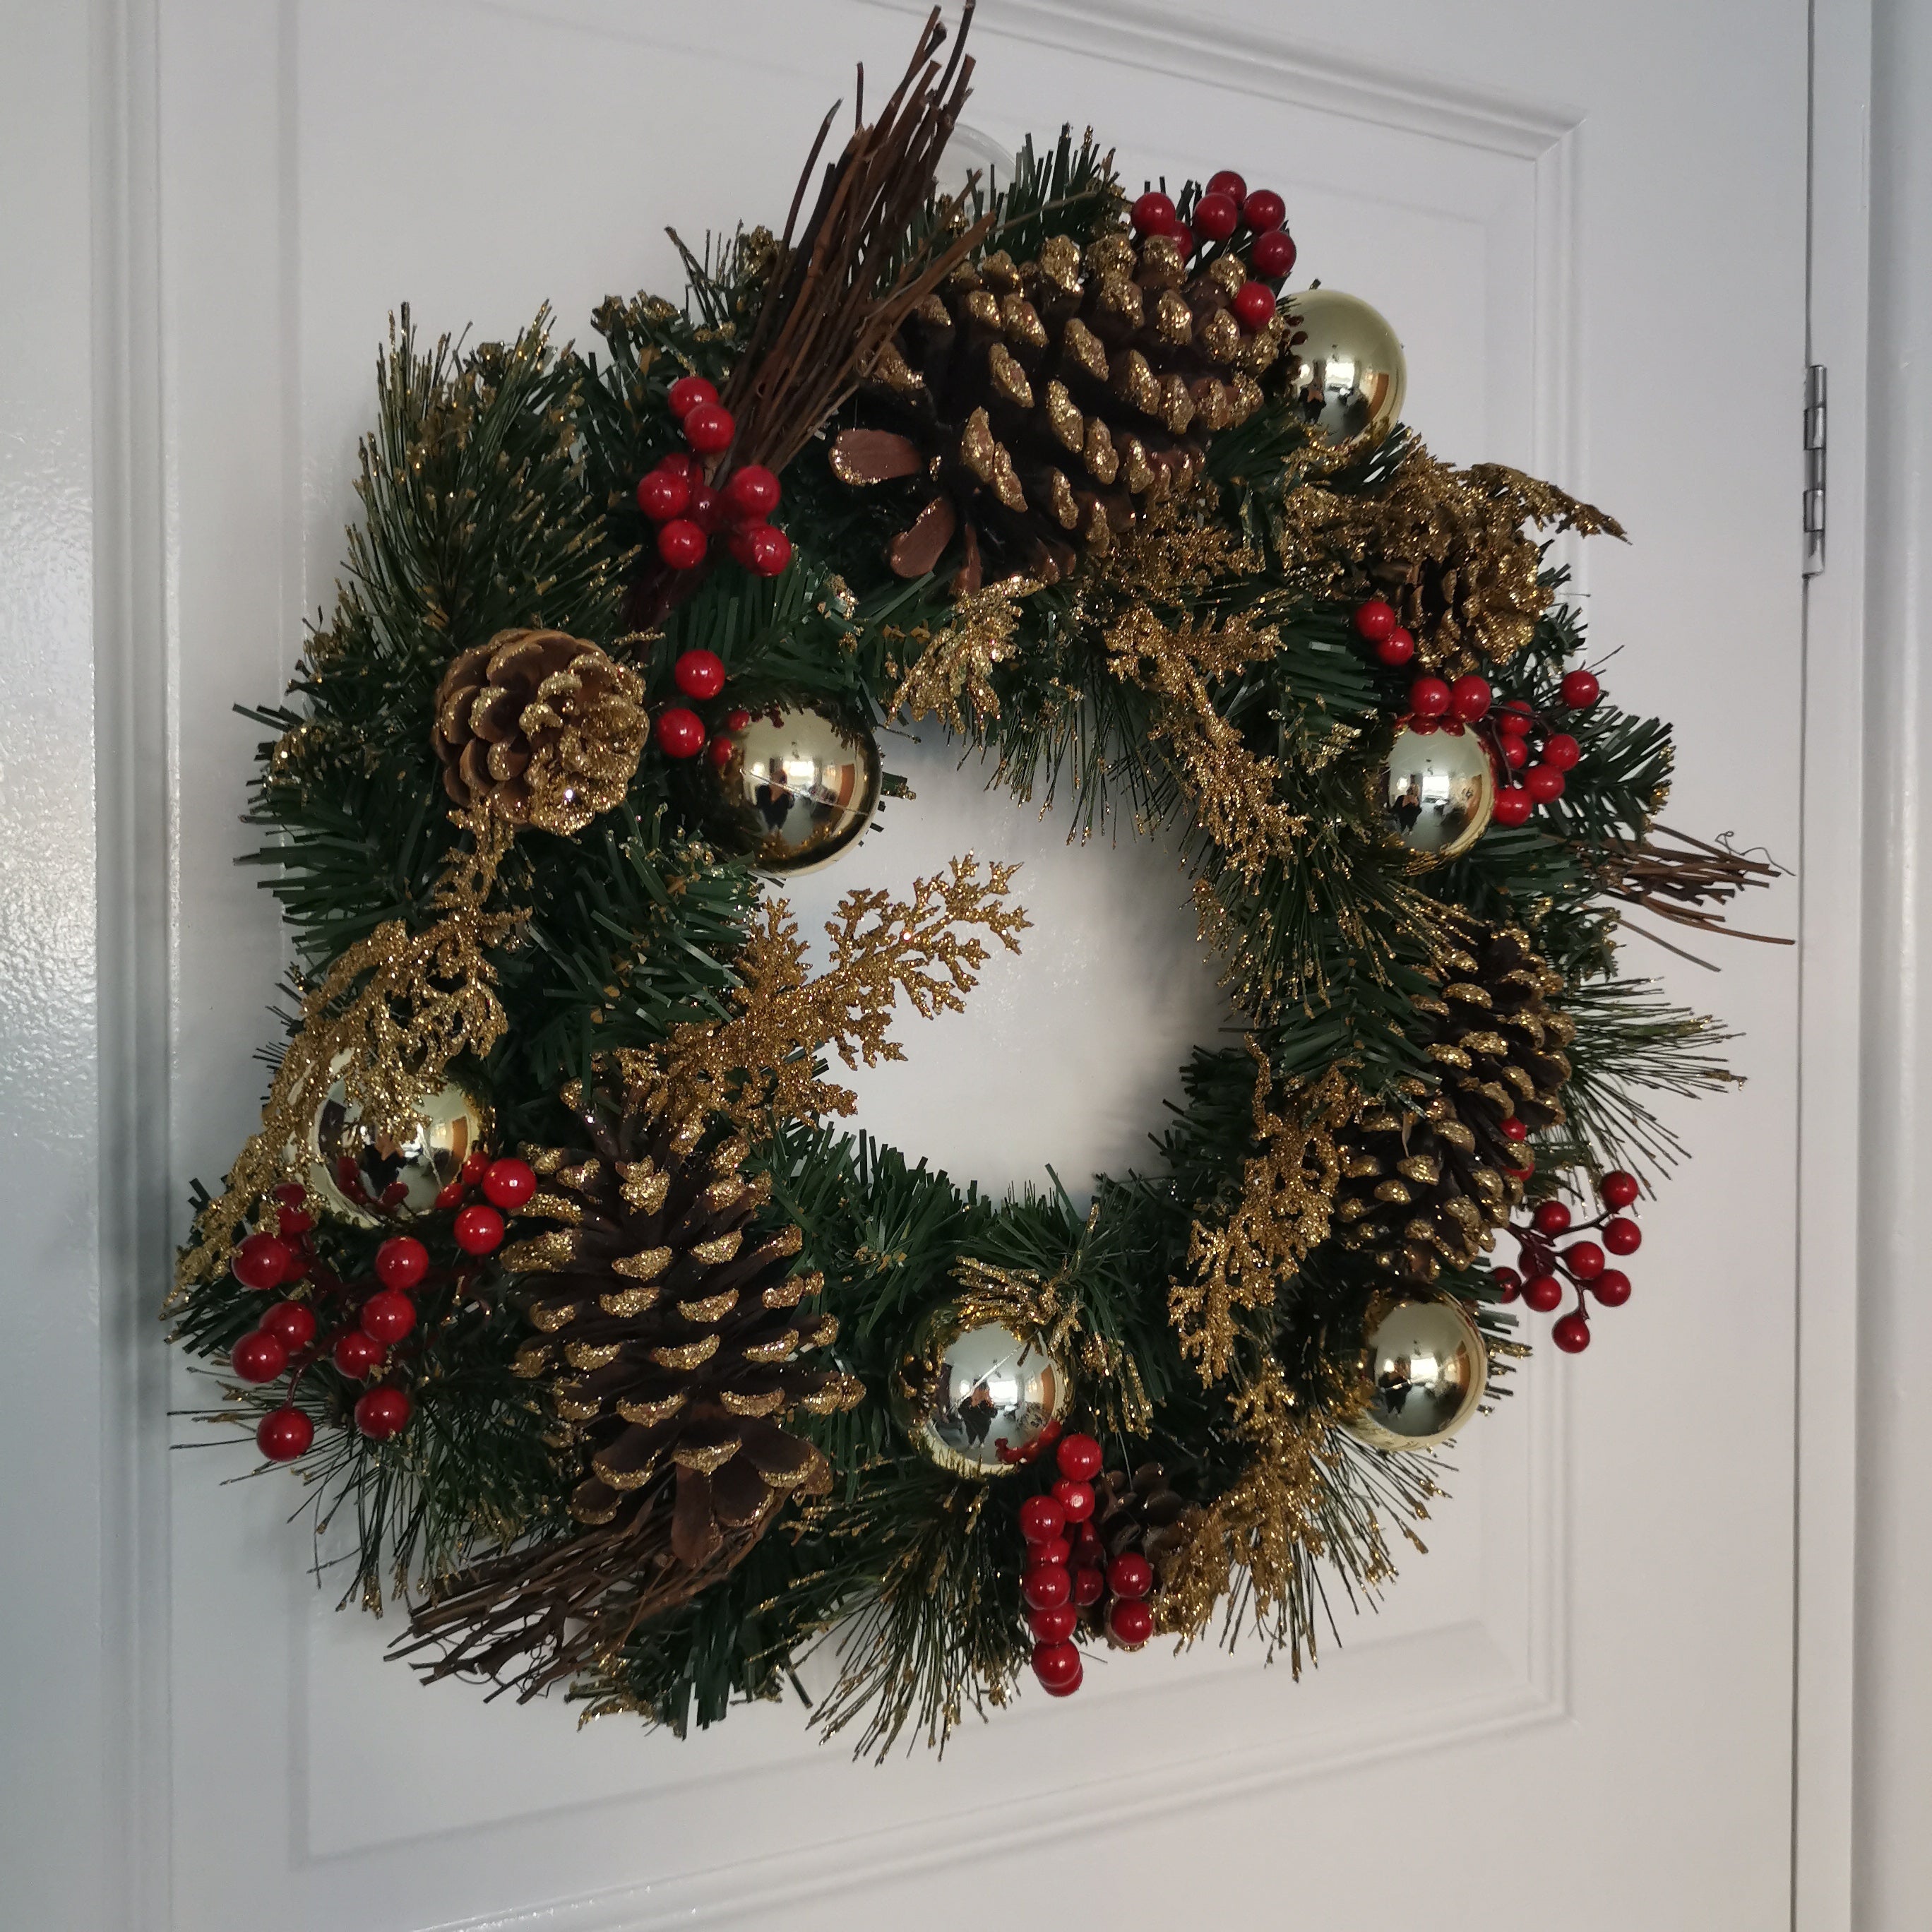 40cm Gold Dressed Christmas Wreath, Baubles, Pinecones and Berries